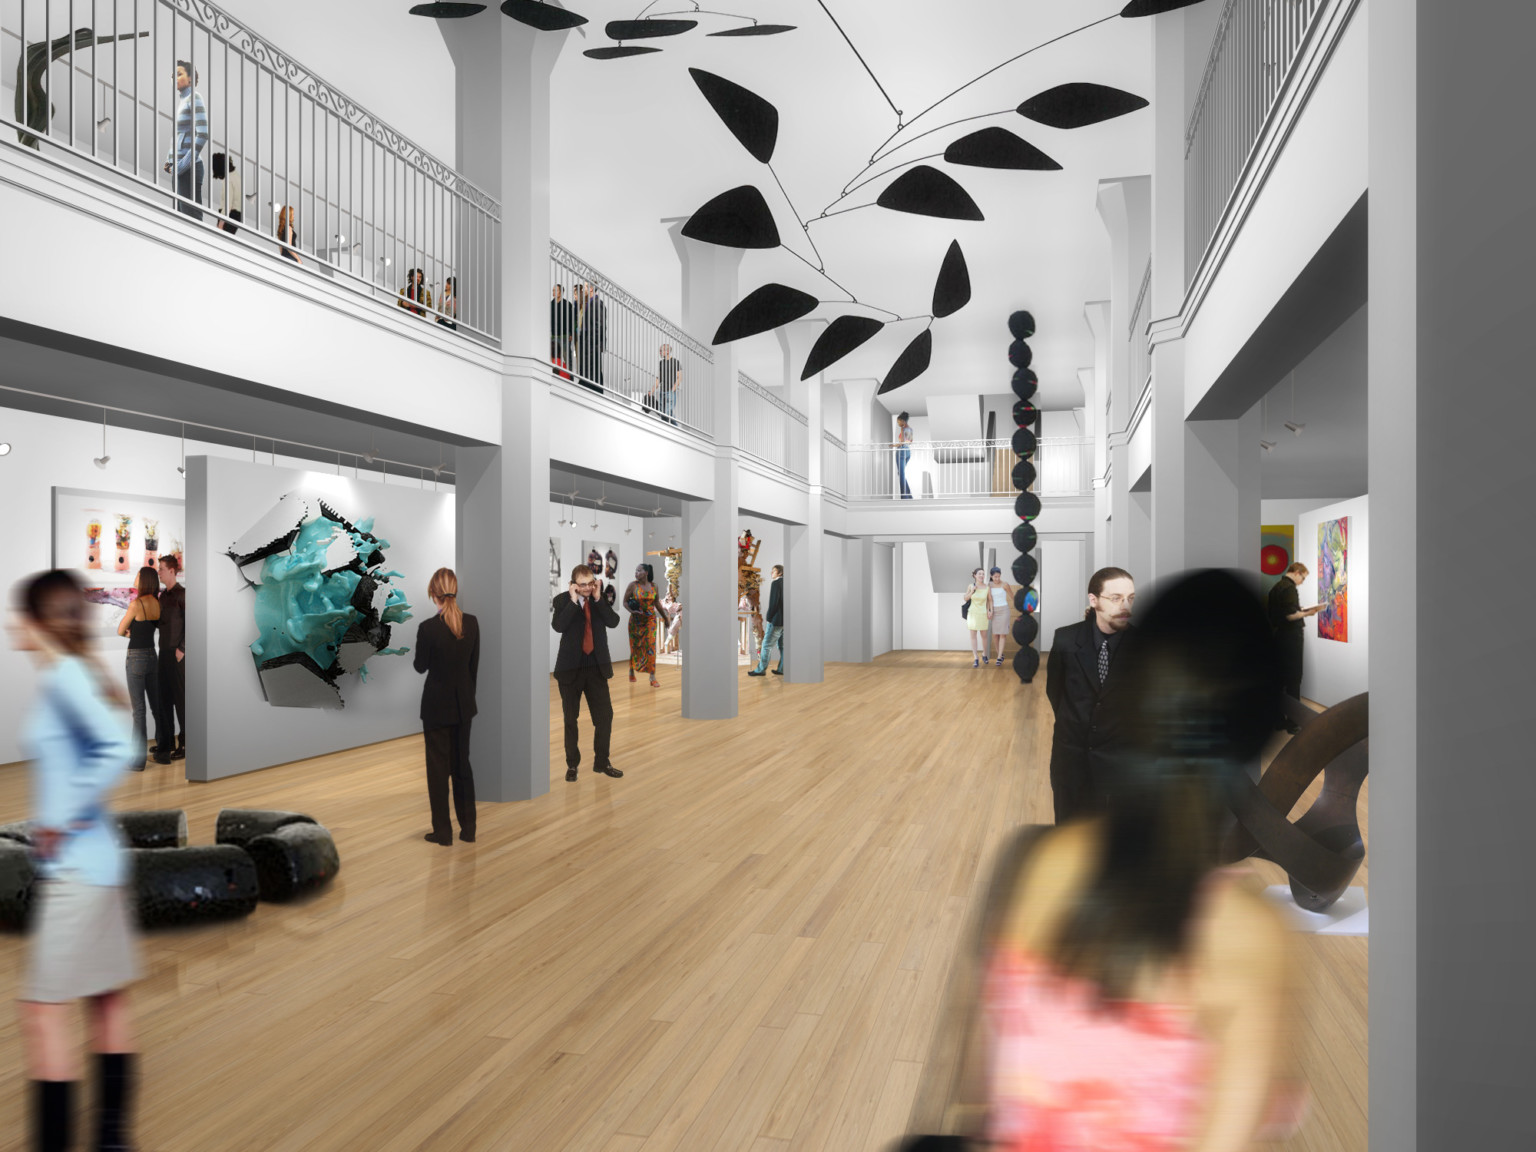 Rendering of white art gallery with two stories with cutout in center, white metal bannisters line the second floor separated by large pillars